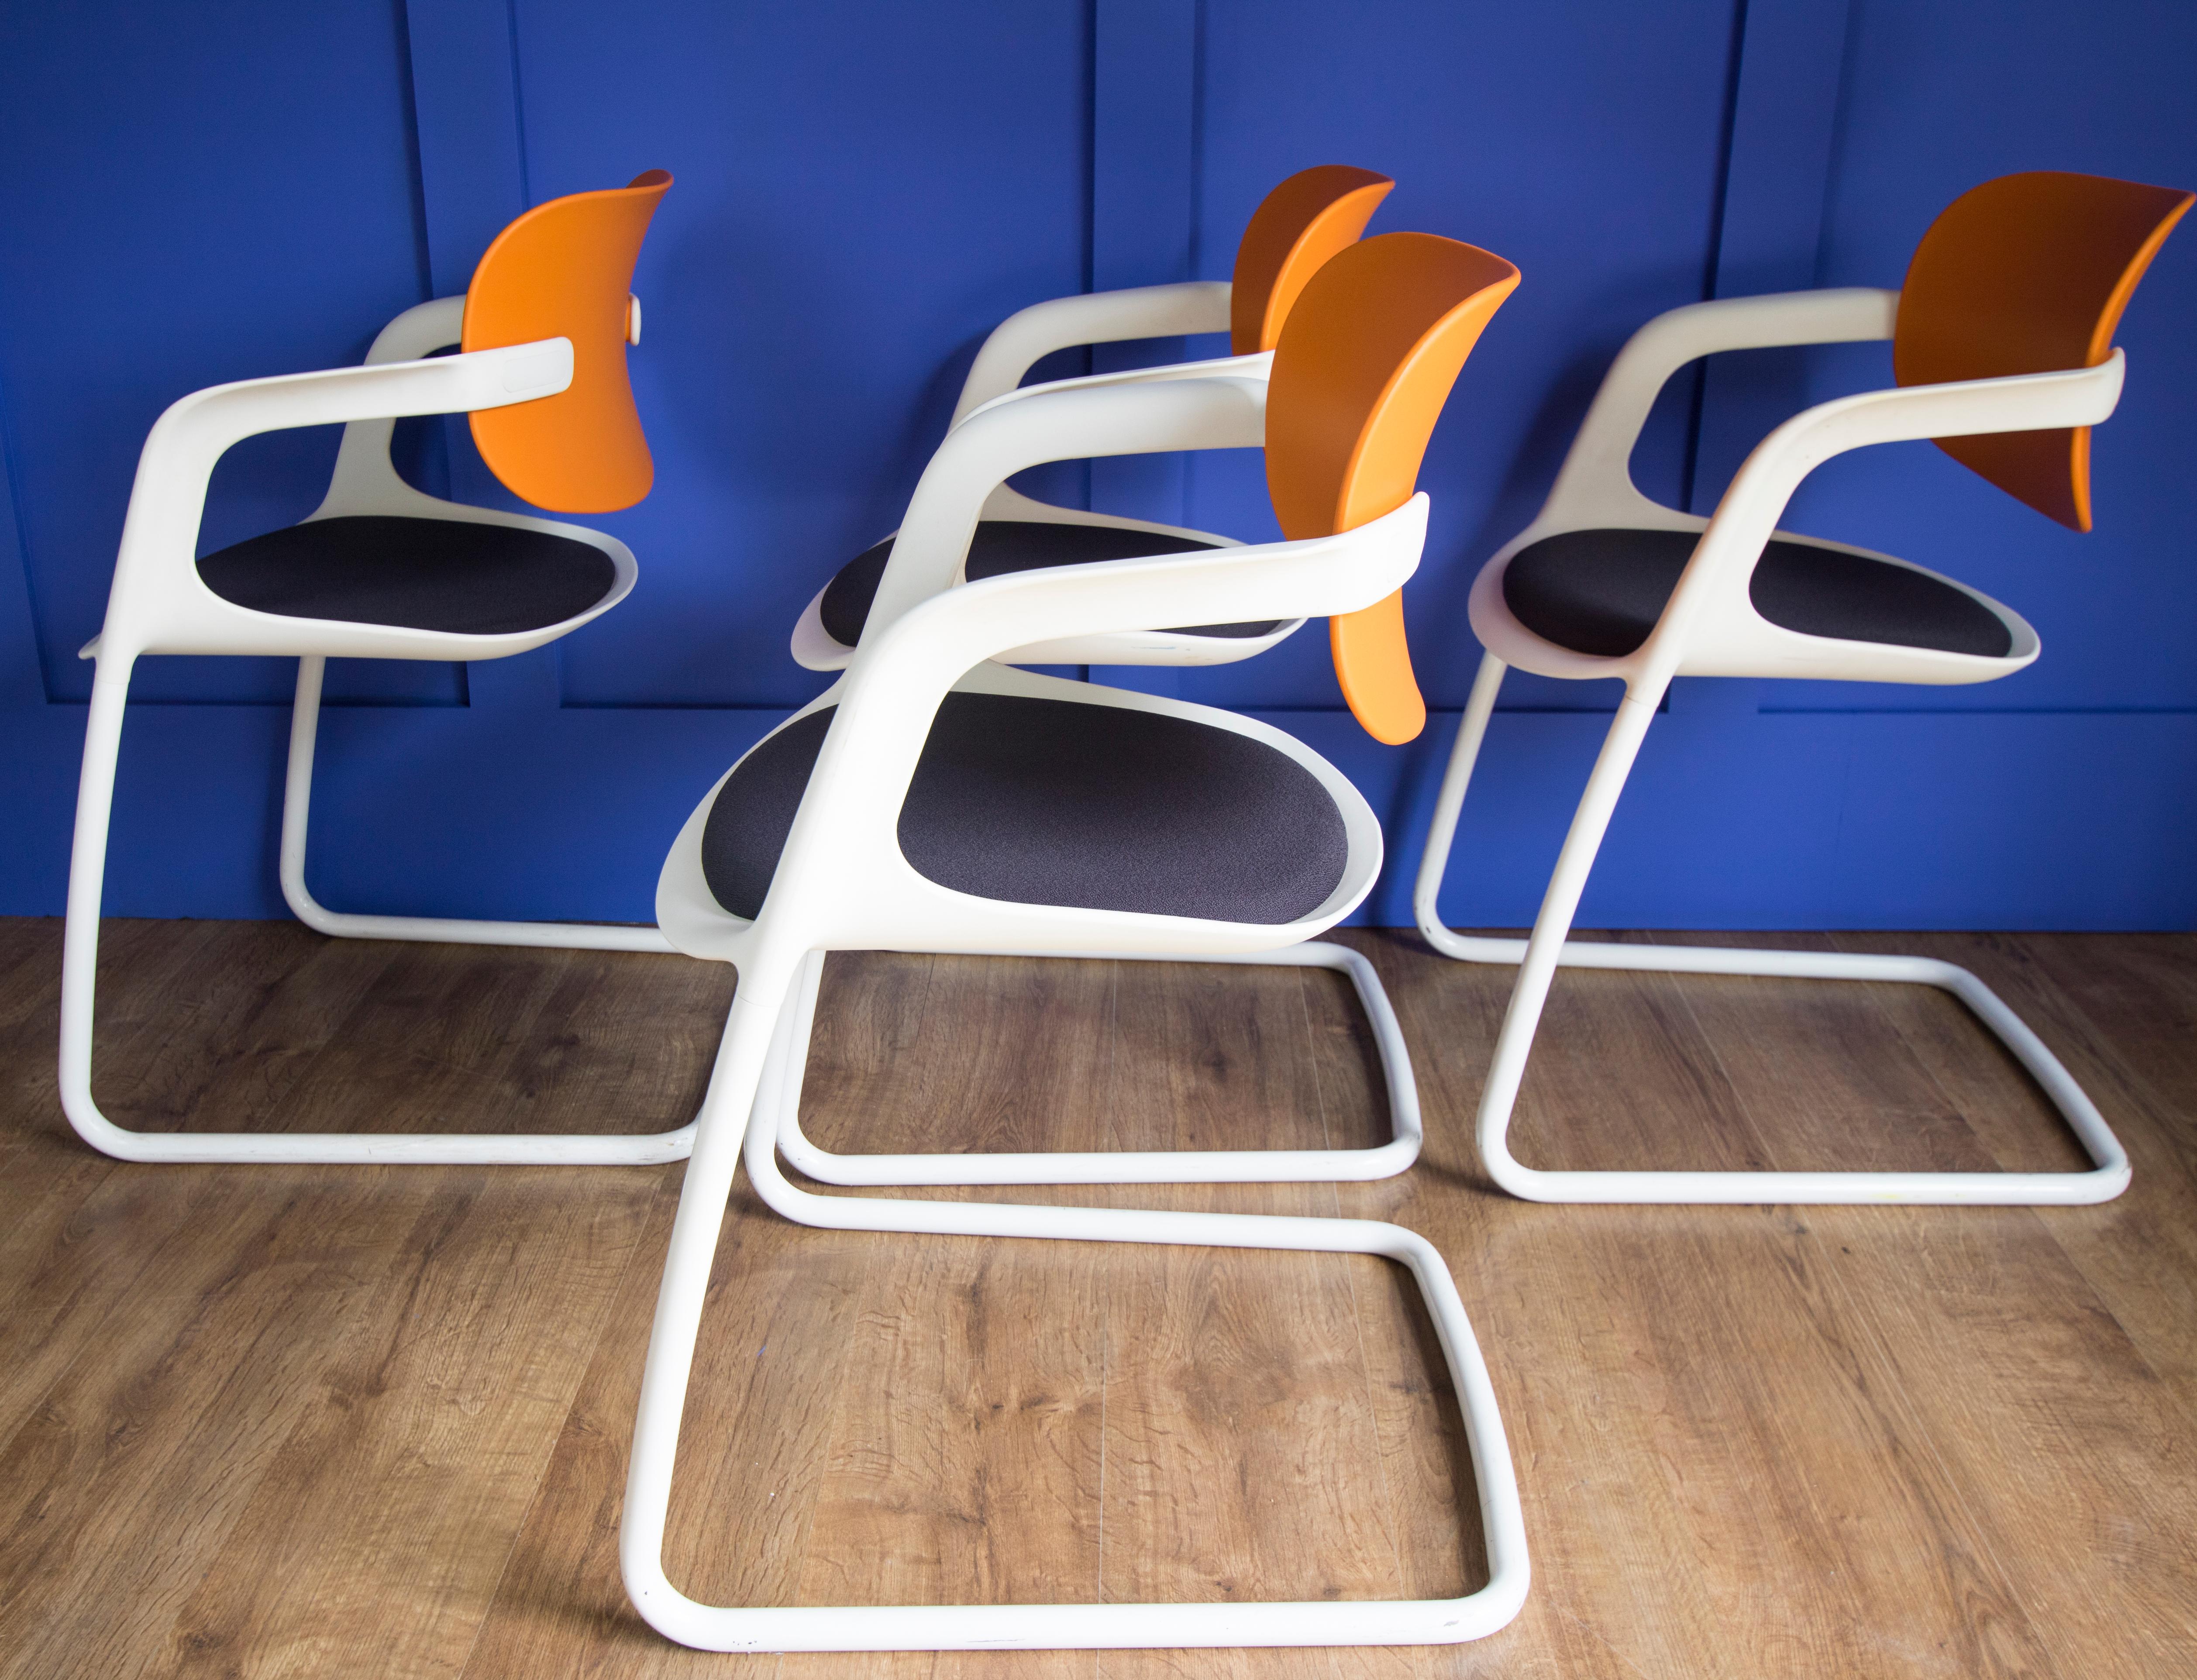 A set of 4 Allermuir Soul dining or office style chairs, with orange backs, white frames, and upholstered navy blue seats, designed by Pearson Lloyd, with maker's marks to the underside. Frames with some marks but structurally completely sound. Very